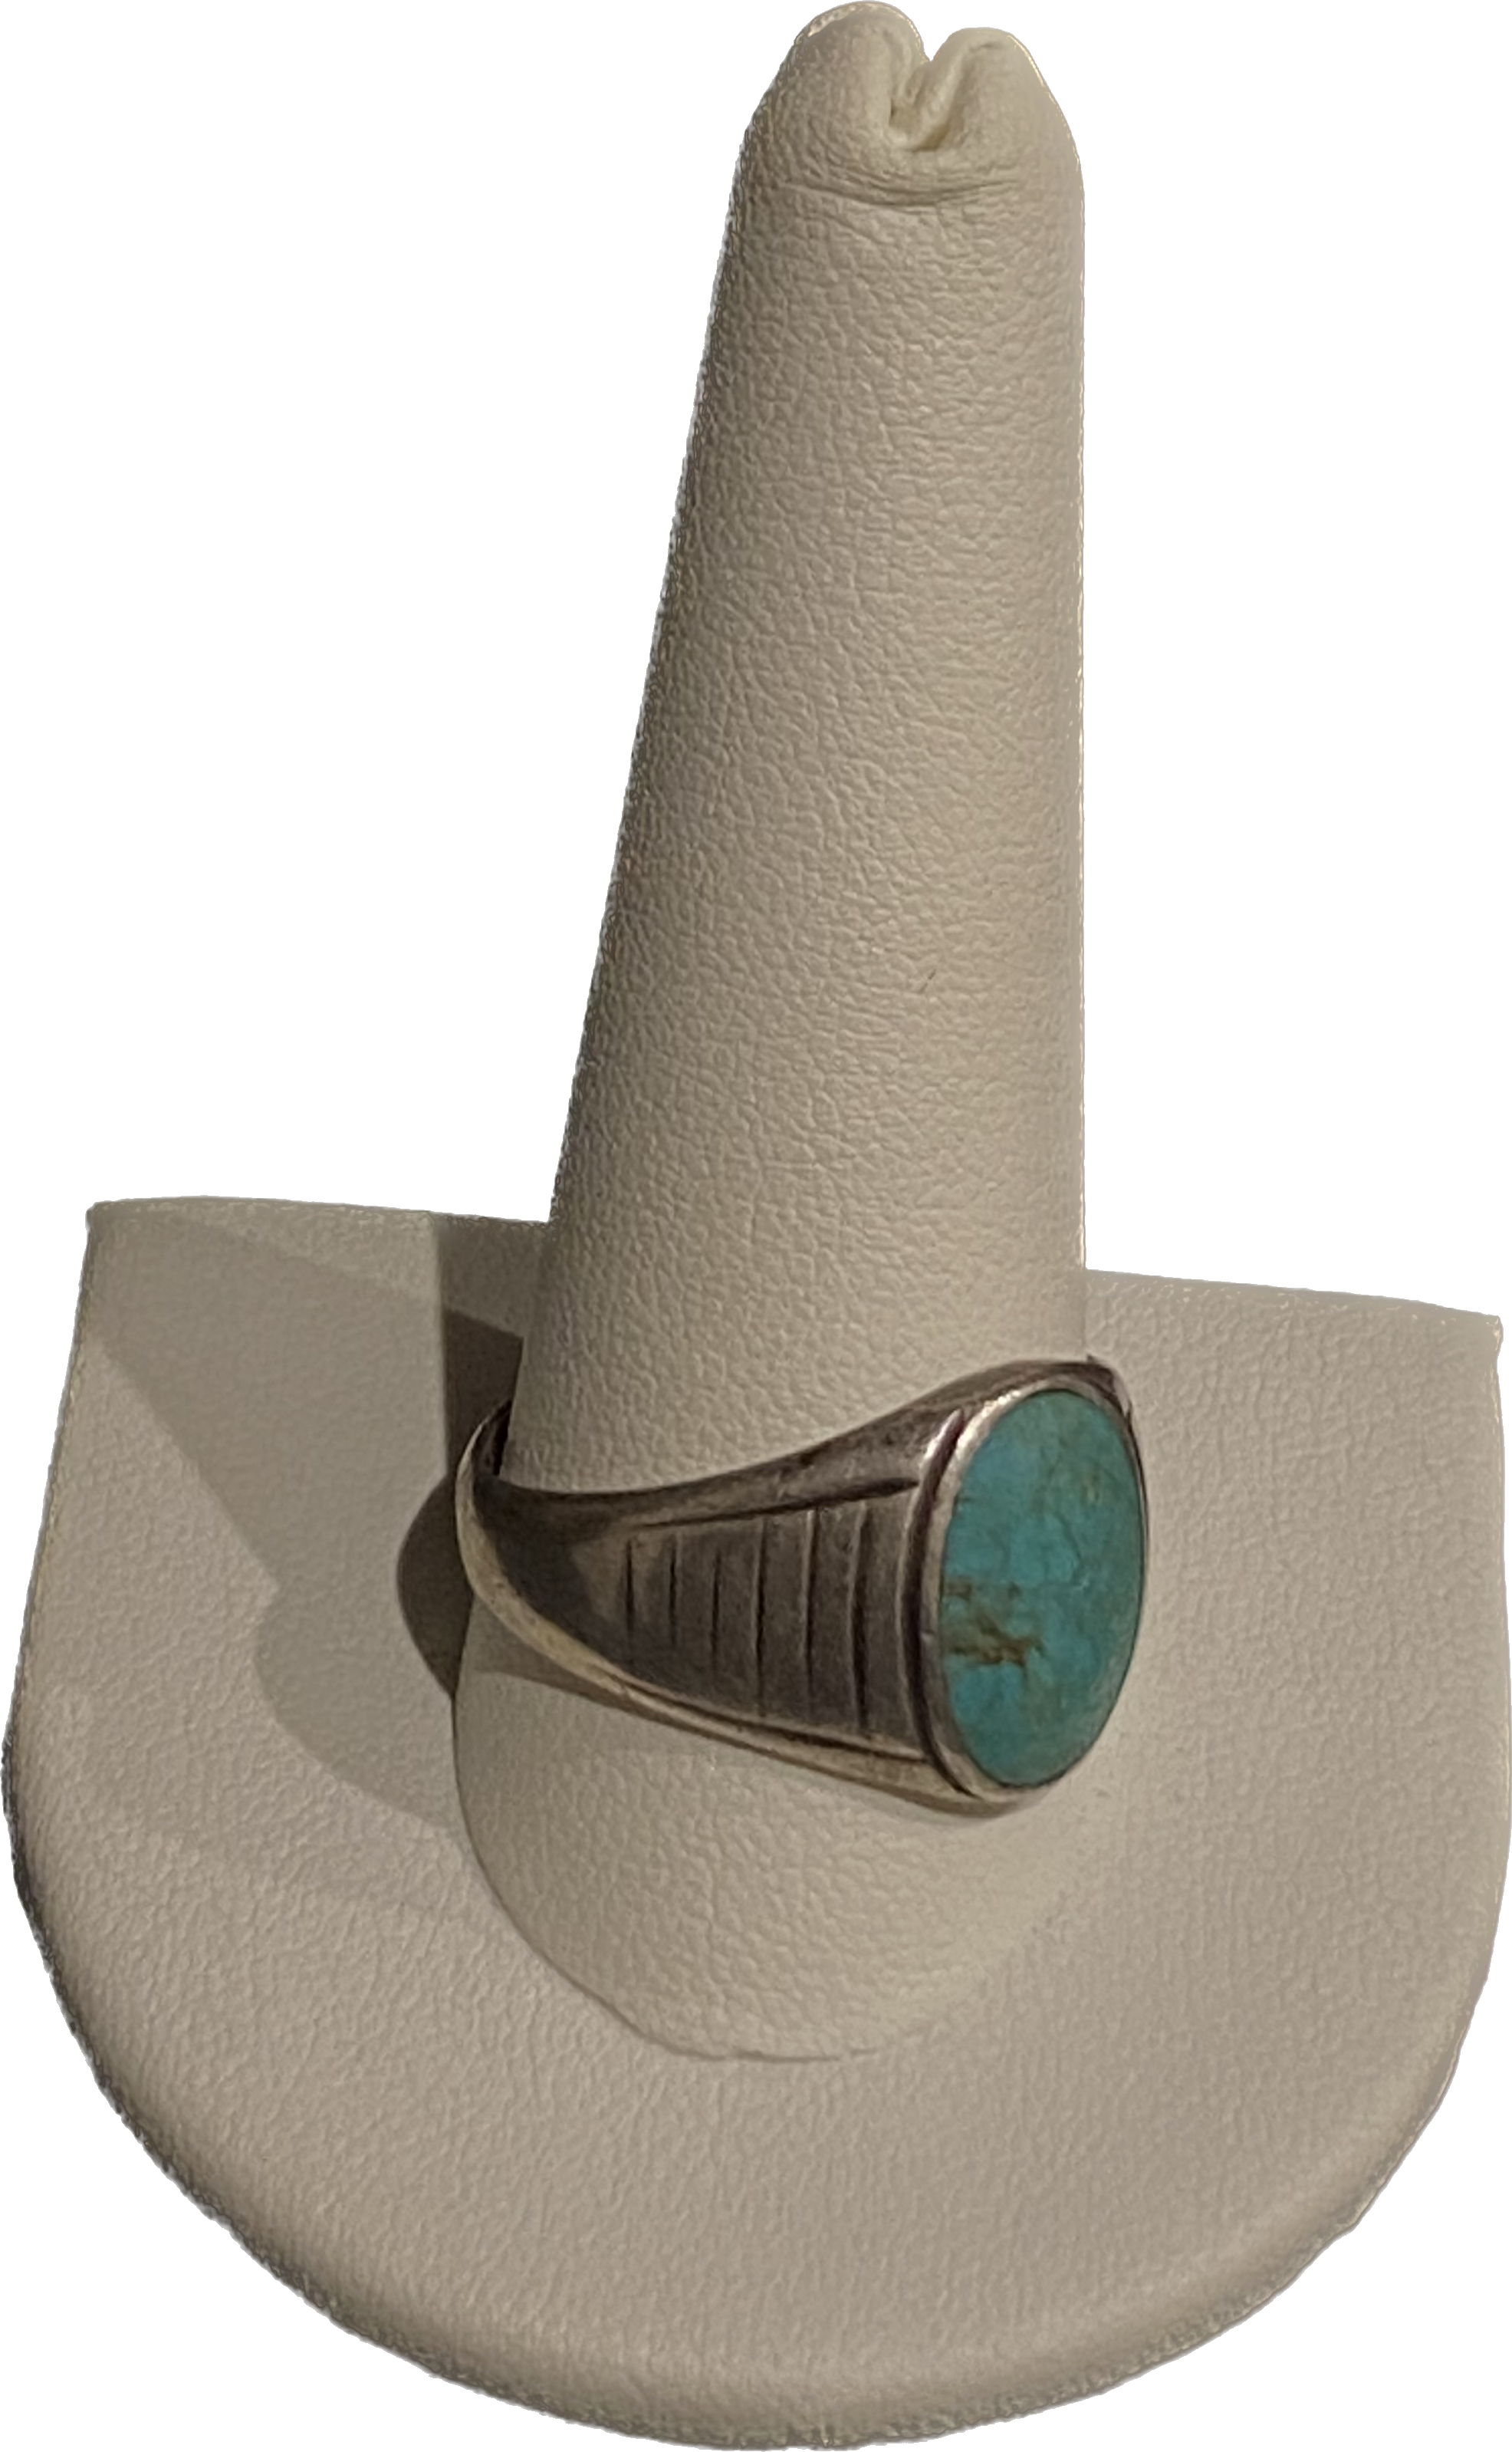 Turquoise Striated Ring - Sterling Silver .925